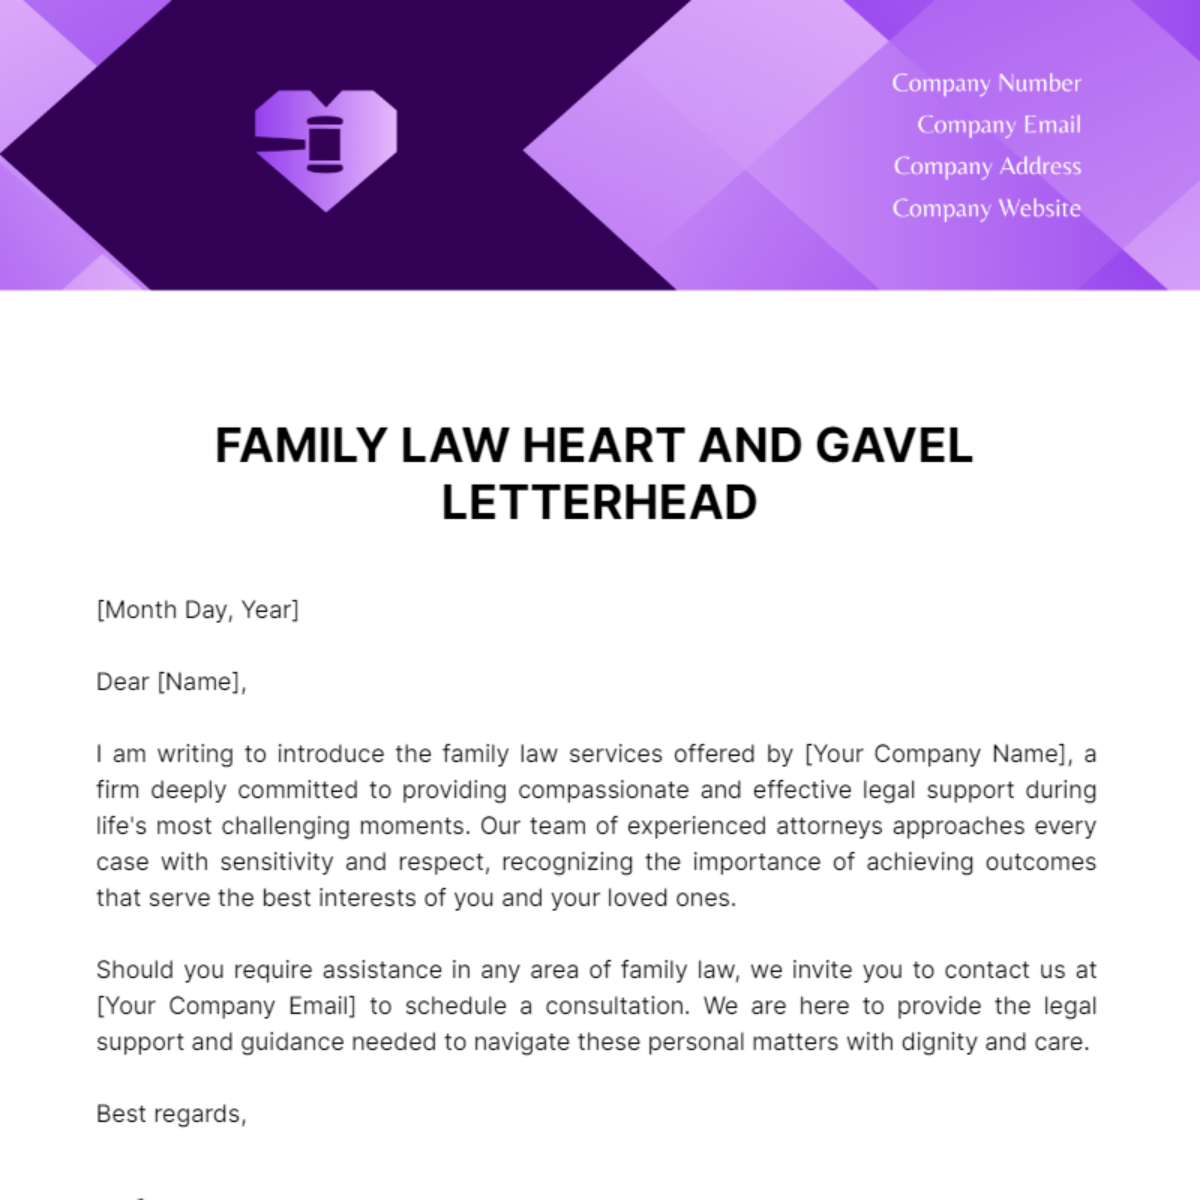 Family Law Heart and Gavel Letterhead Template